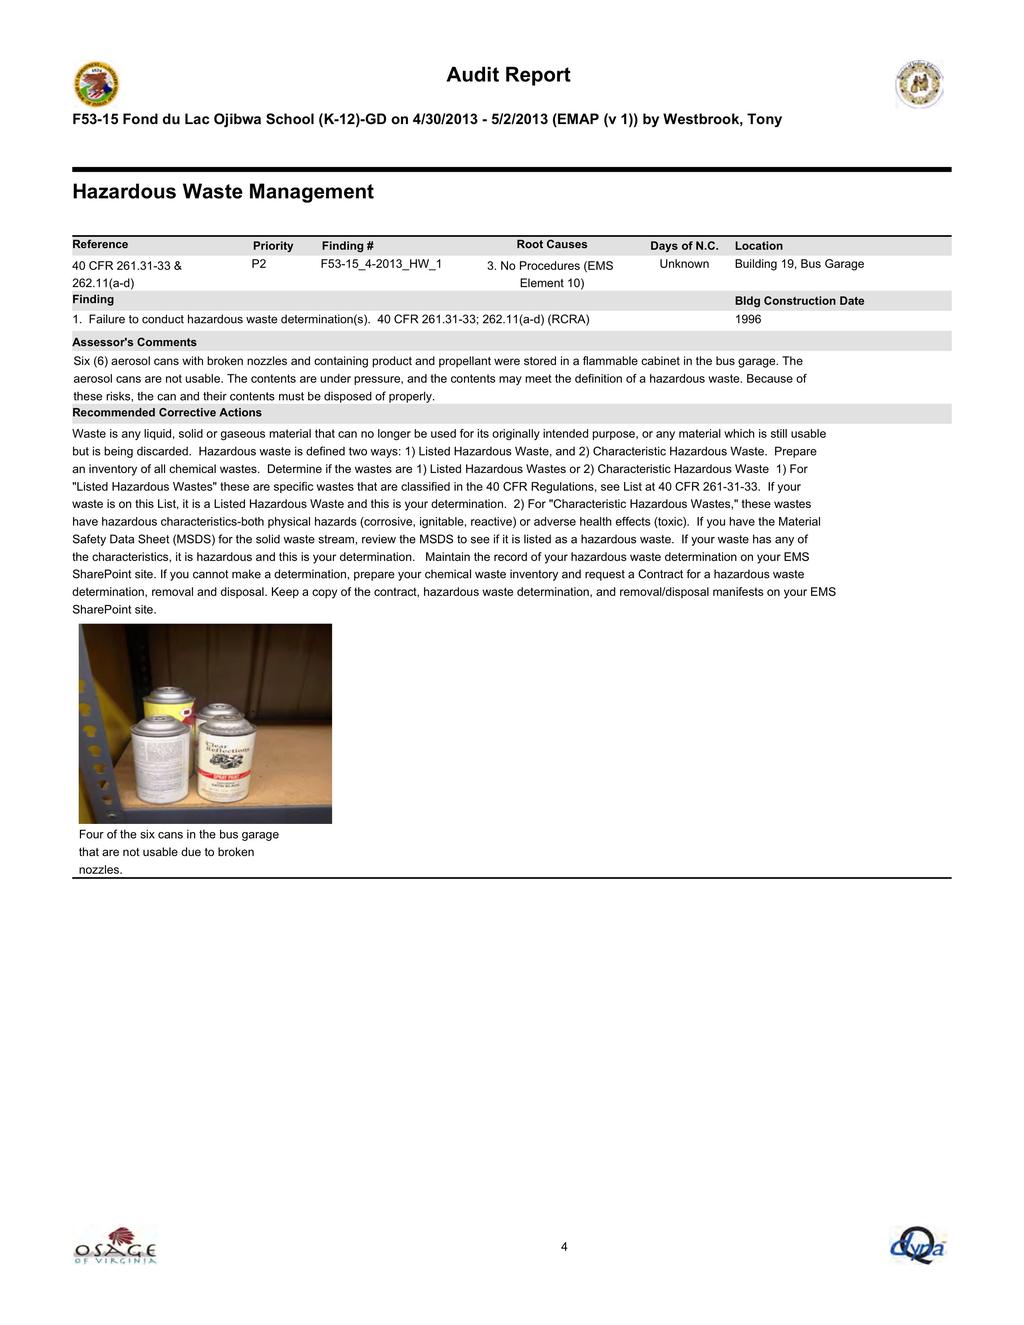 Audit Report F53-15 Fond du Lac Ojibwa School (K-12)-GD on 4/30/2013-5/2/2013 (EMAP (v 1)) by Westbrook, Tony Hazardous Waste Management Reference Priority Finding # Root Causes Days of N.C. Location 40 CFR 261.